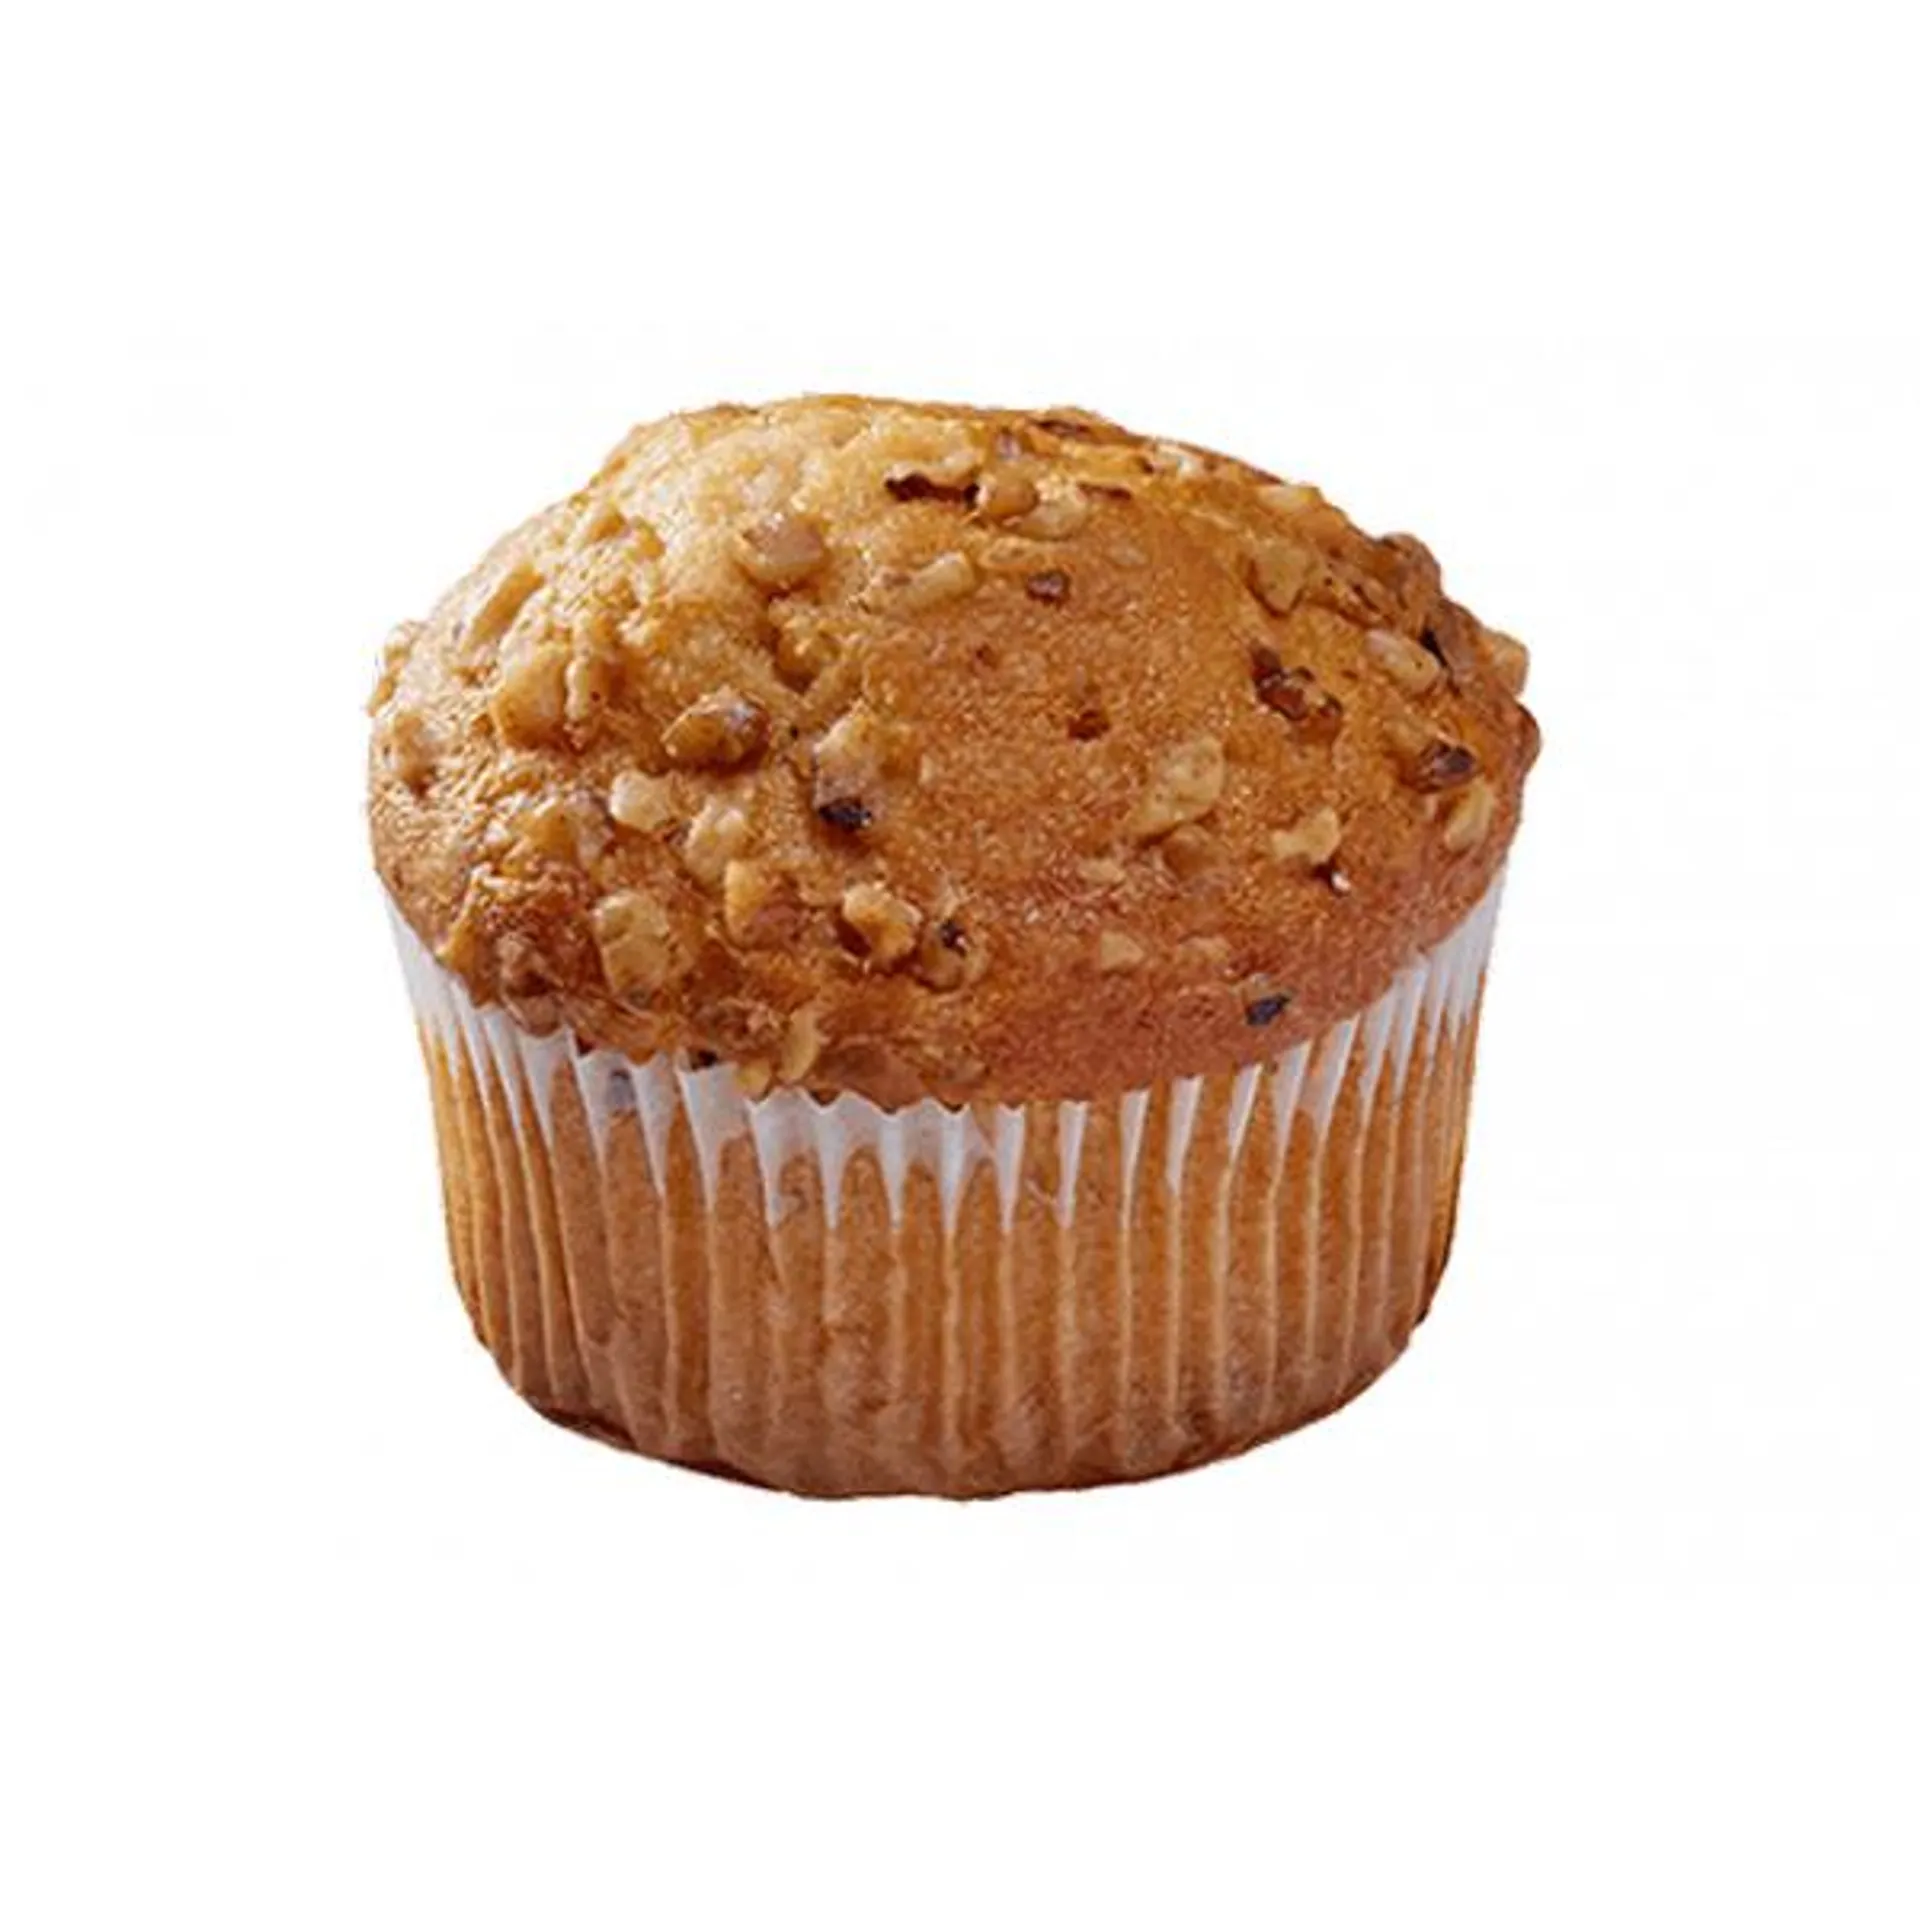 Banana Nut Muffins 4ct - 12 Ounce